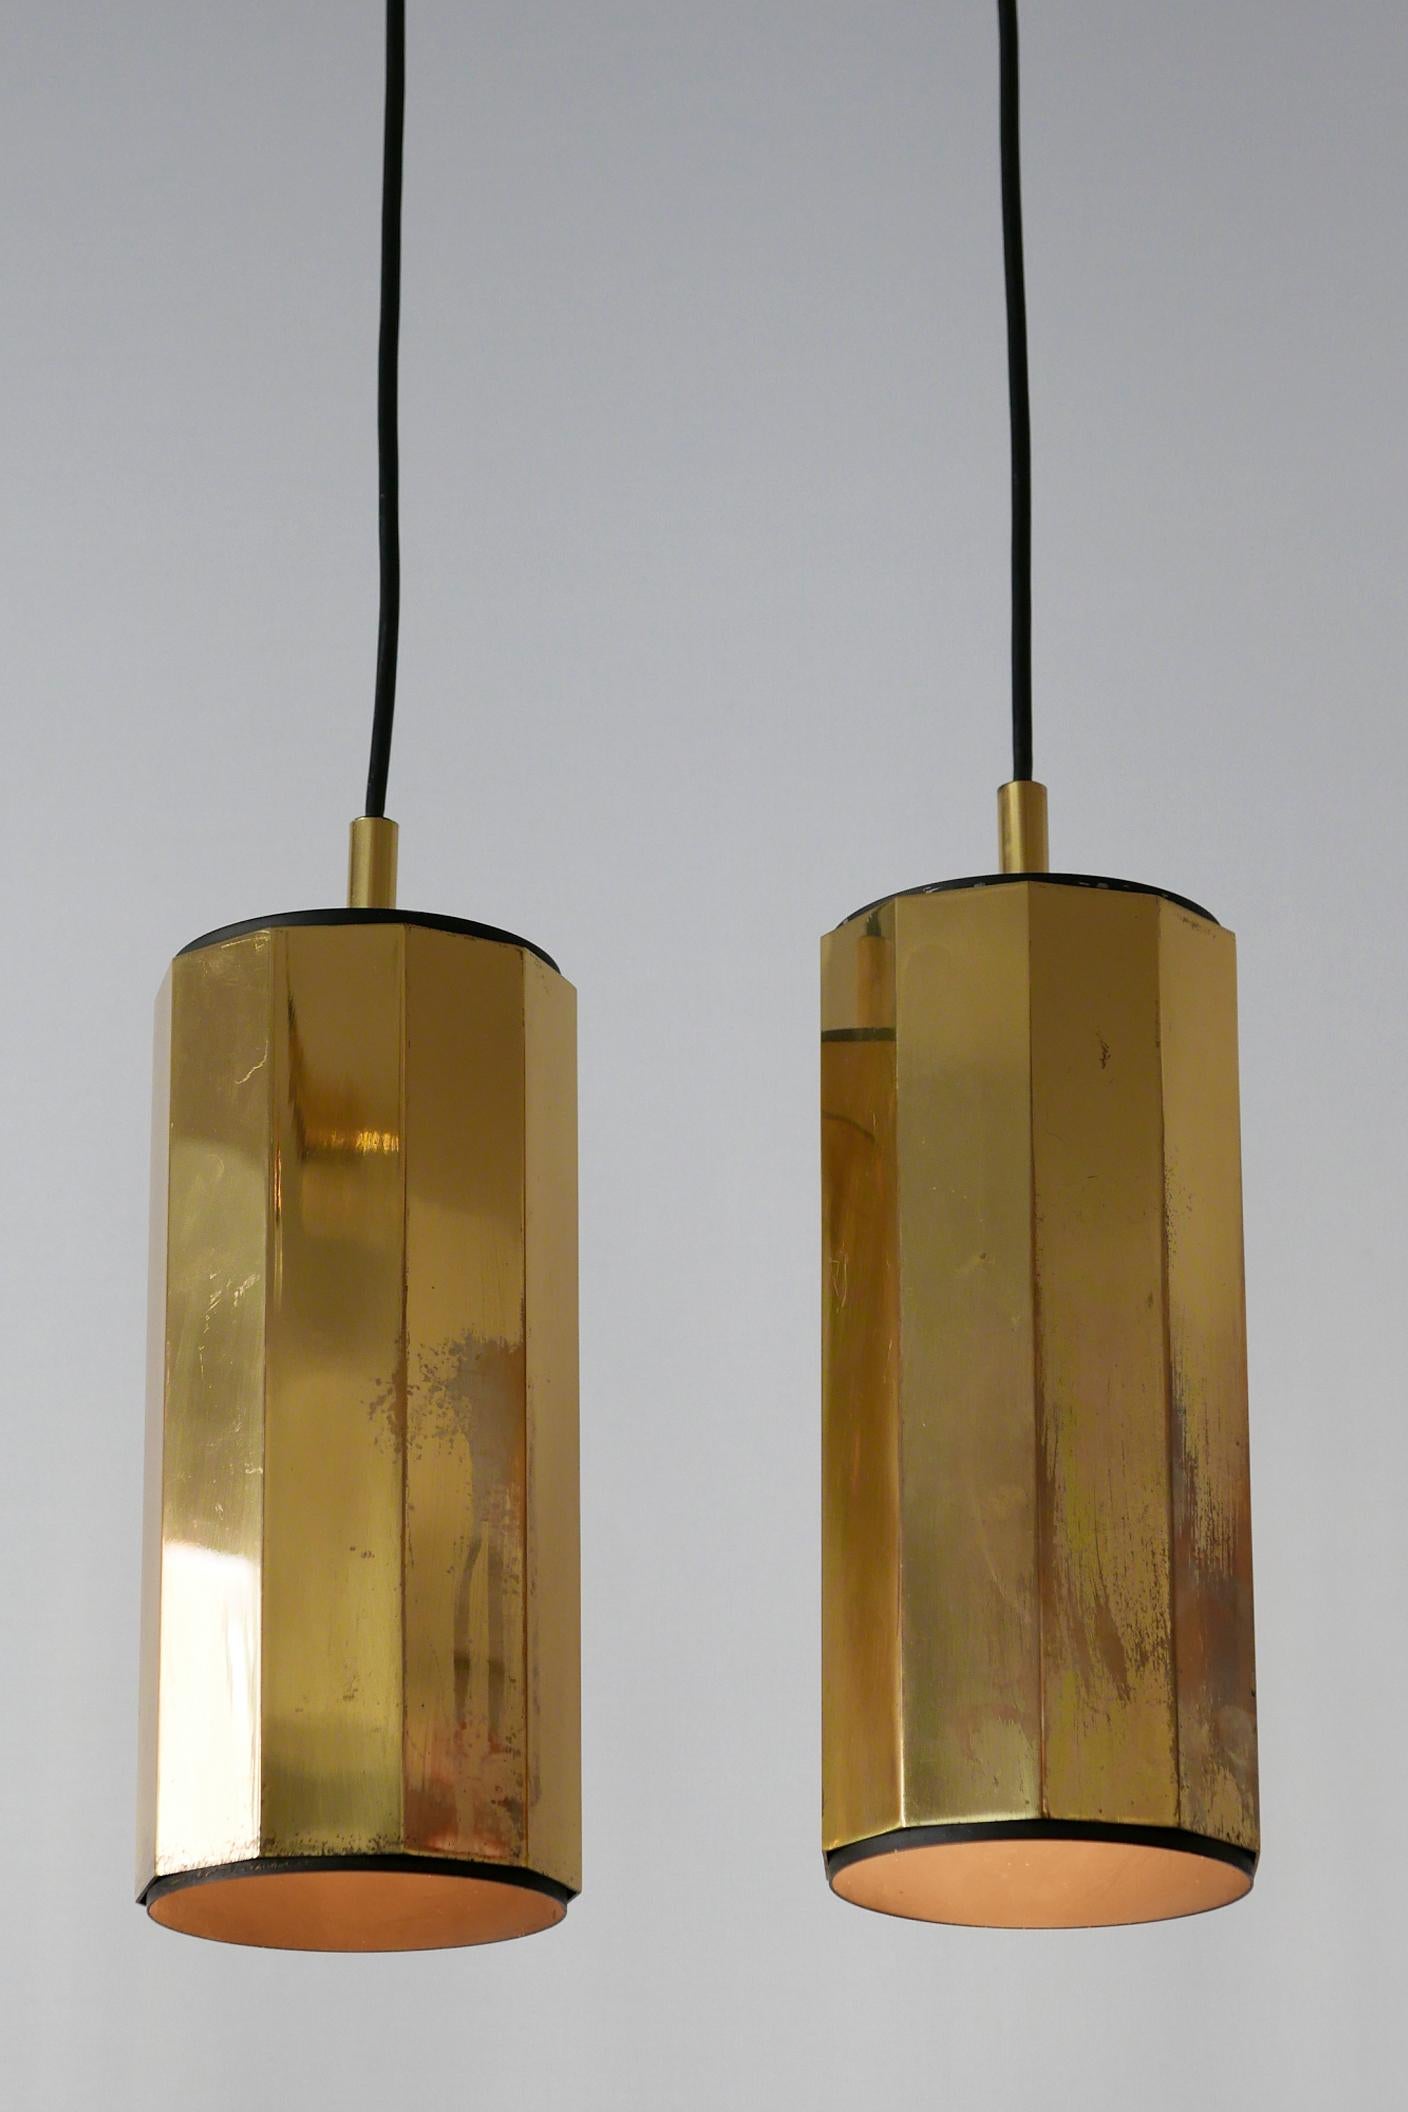 Polished Set of Two Exceptional Mid-Century Modern Decagonal Brass Pendant Lamps, 1960s